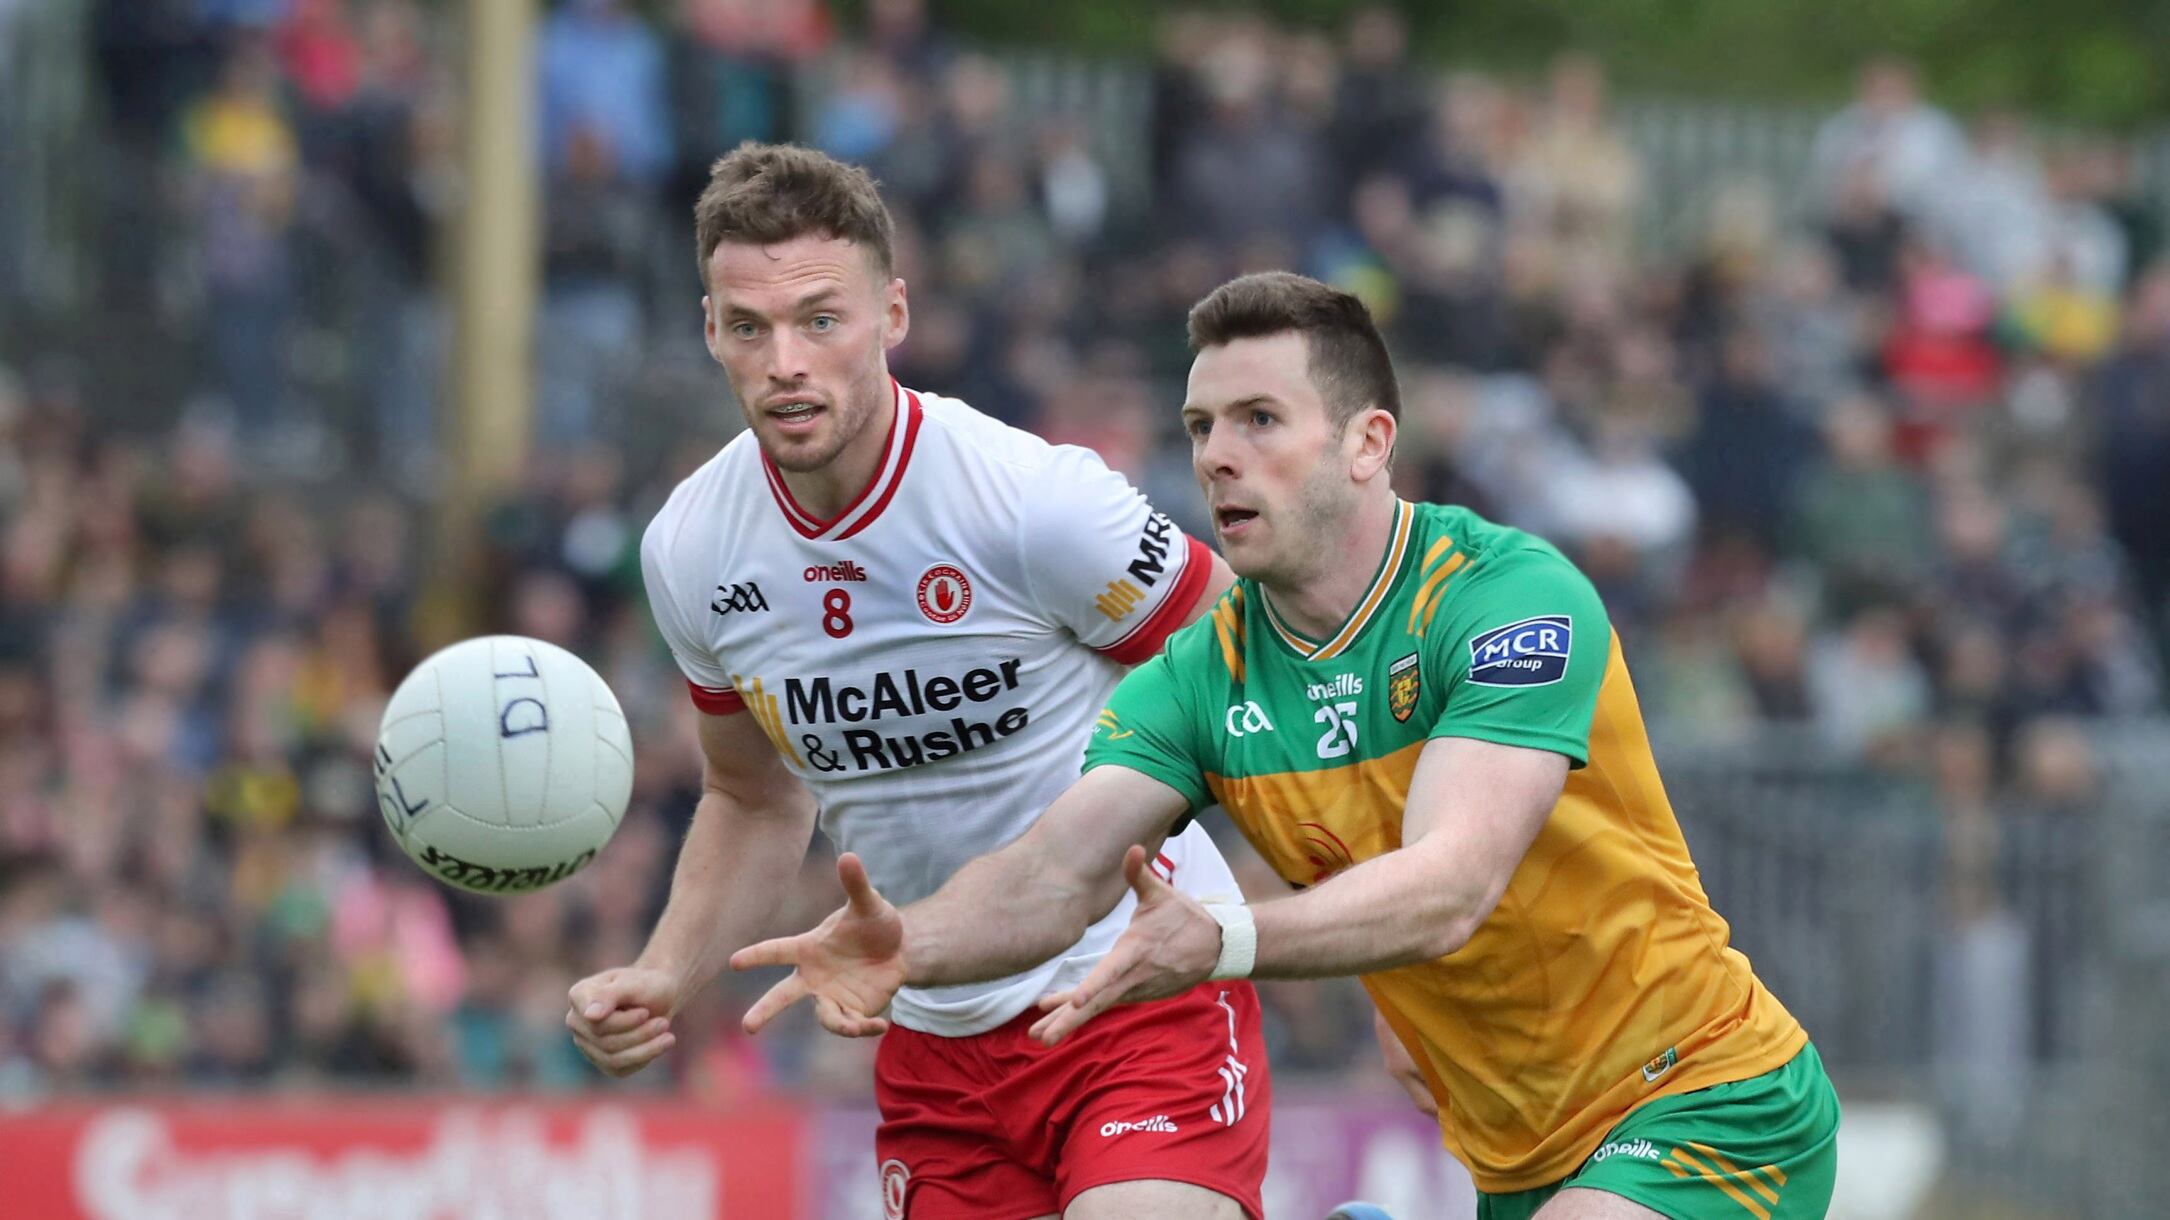 Brian Kennedy of Tyrone chasing after Donegal's Eoghan Bán Gallagher during an All-Ireland Senior Football Championship match